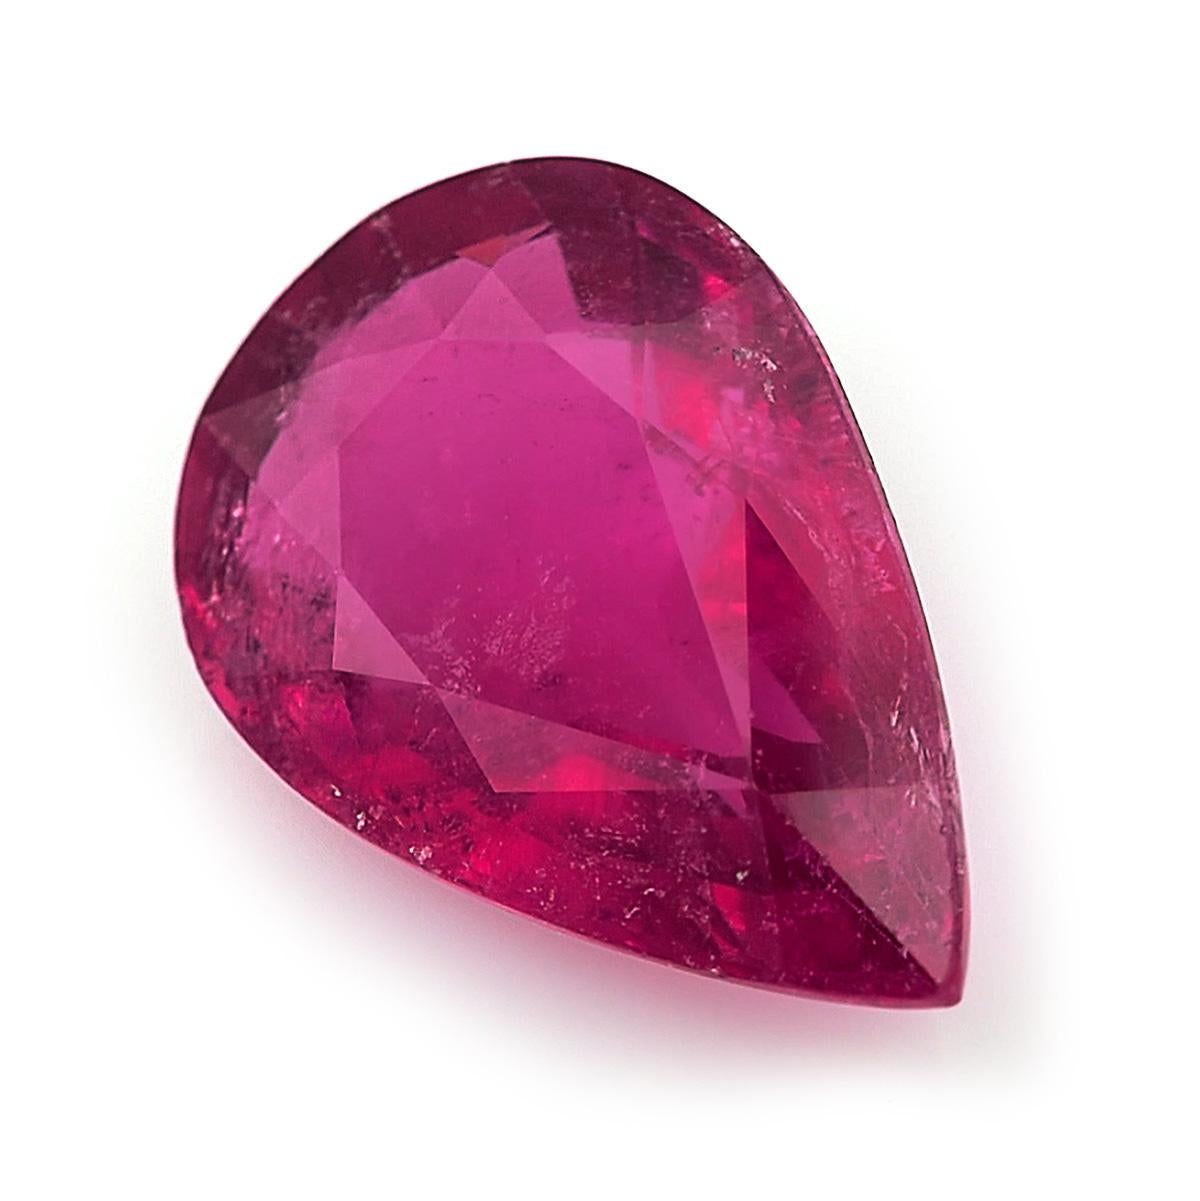 Identification: Natural Rubellite 6.01 carats 

Carat: 6.01 carats
Shape: Pear
Measurements:  15.9 x 10.3 x 6.0 mm 
Cut: Brilliant/Step
Color: Pink 
Clarity: very eye clean

Behold a spectacular natural Rubellite gemstone, boasting a generous weight